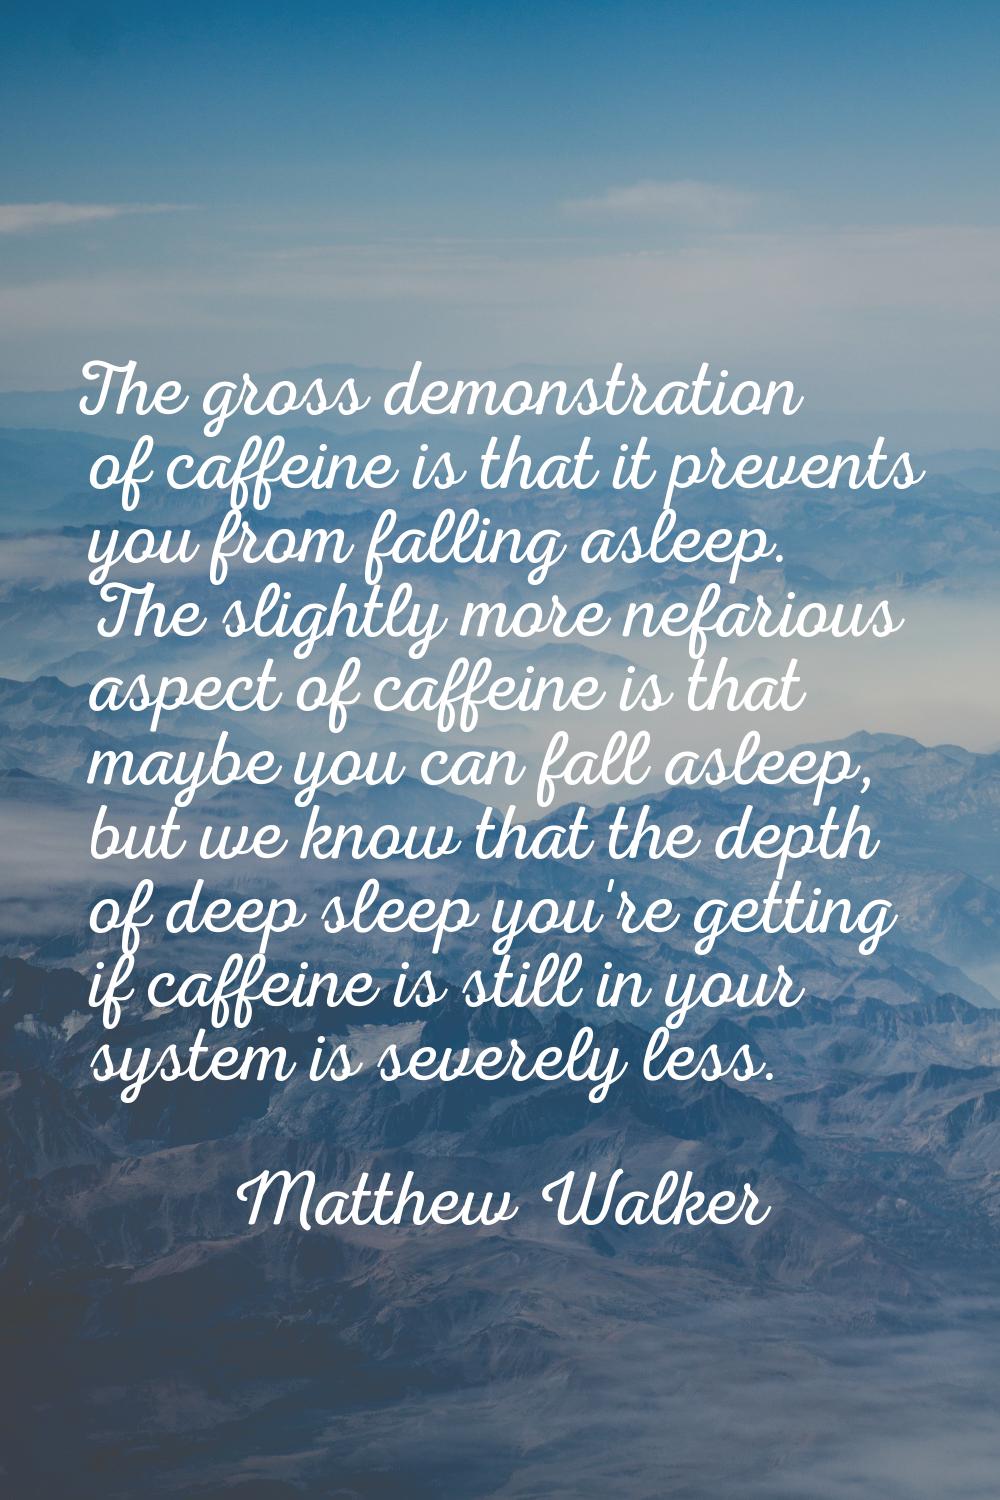 The gross demonstration of caffeine is that it prevents you from falling asleep. The slightly more 